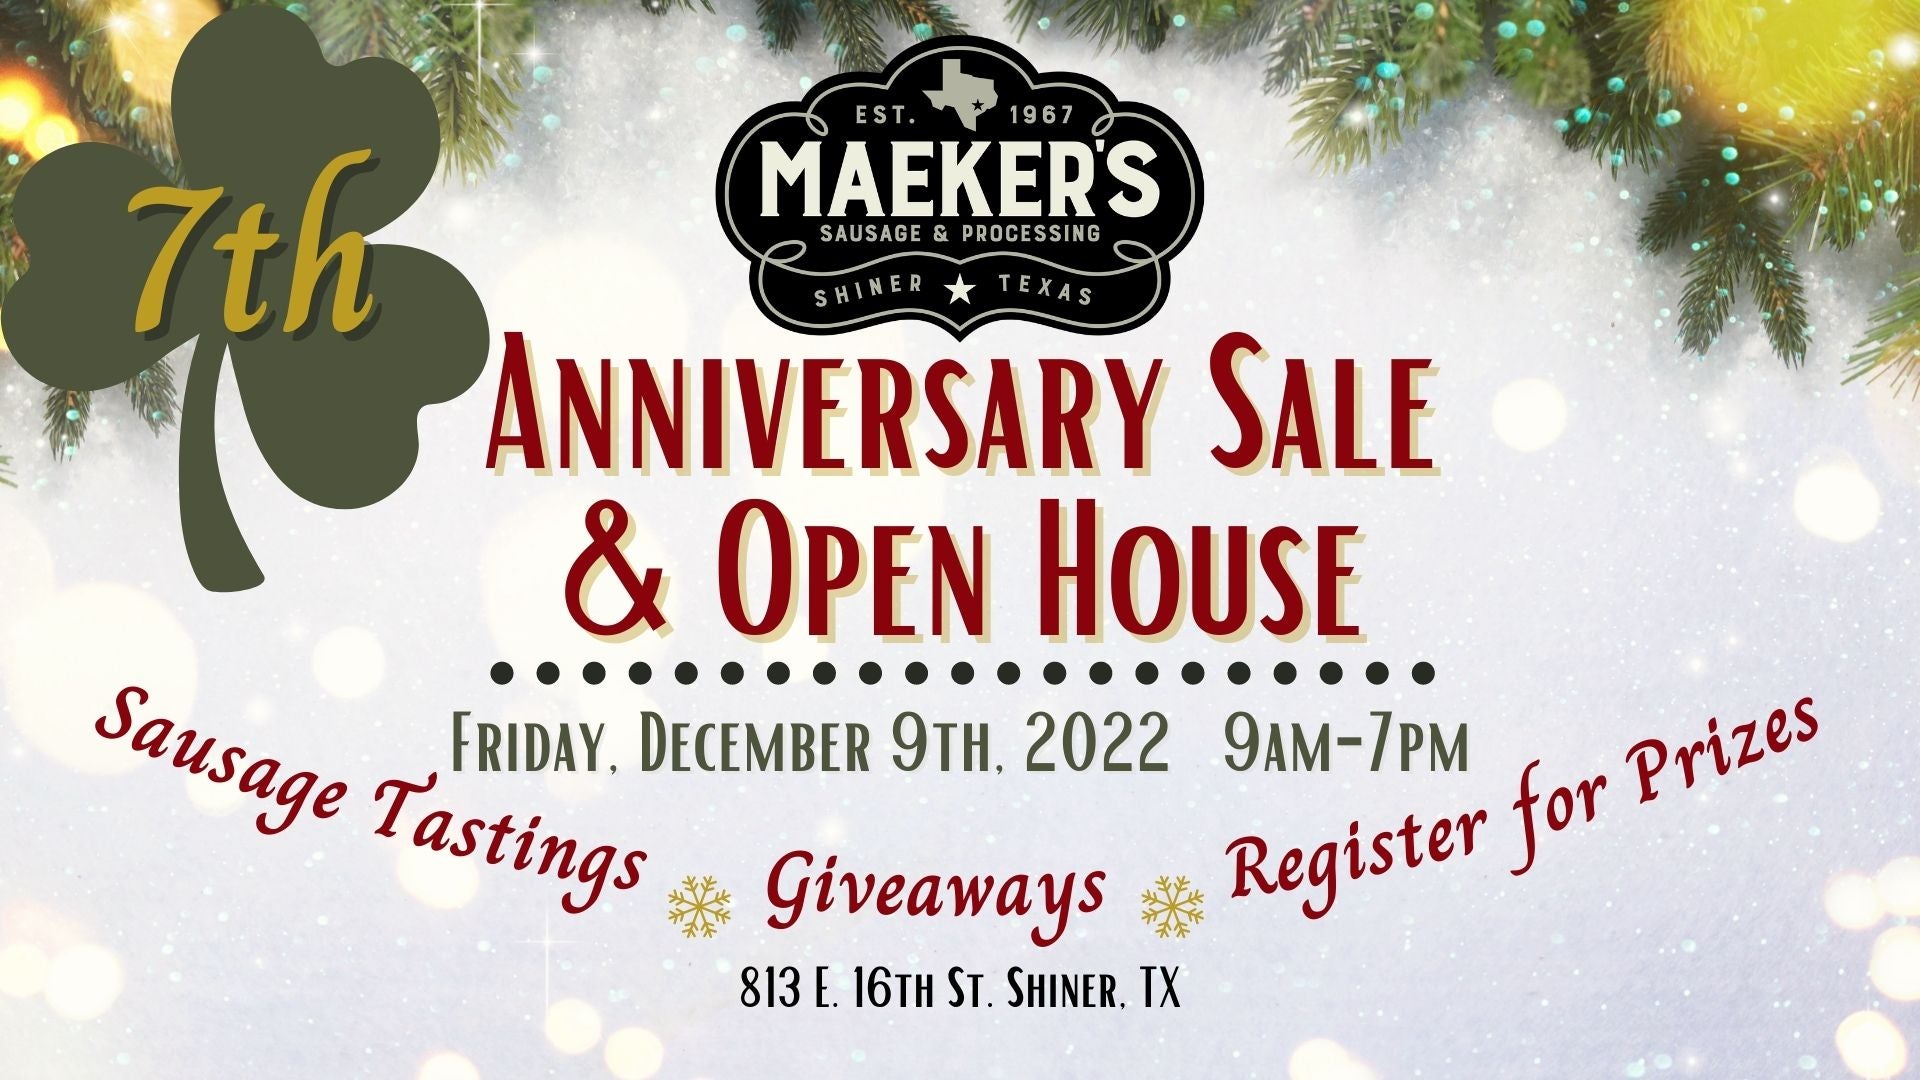 7th Anniversary Sale & Open House